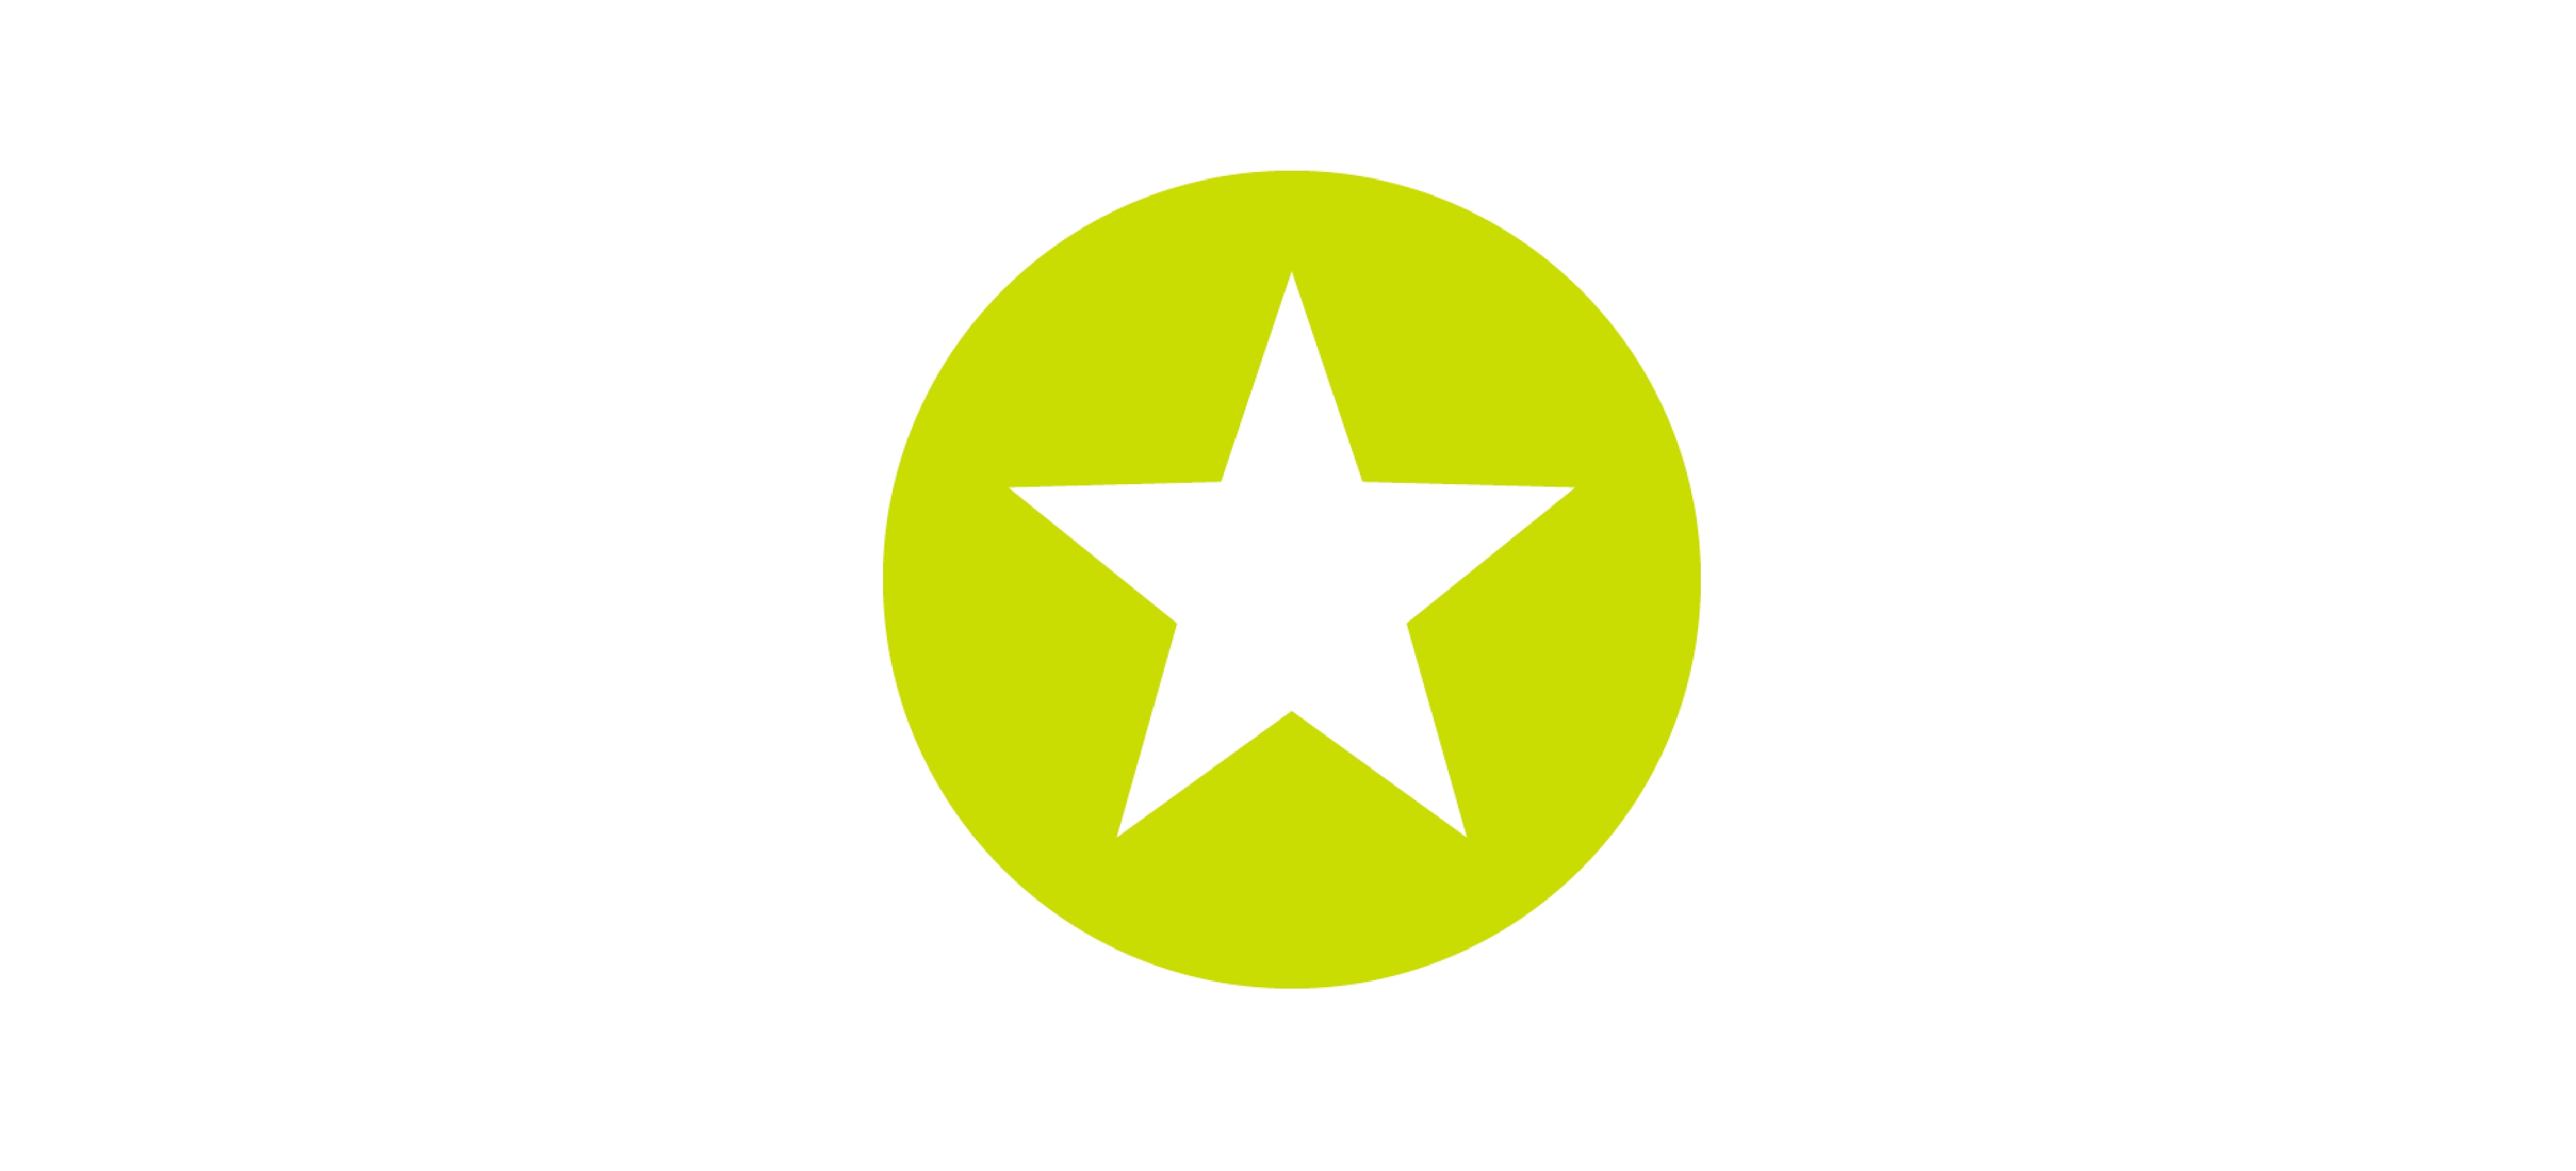 Green icon depicting a star